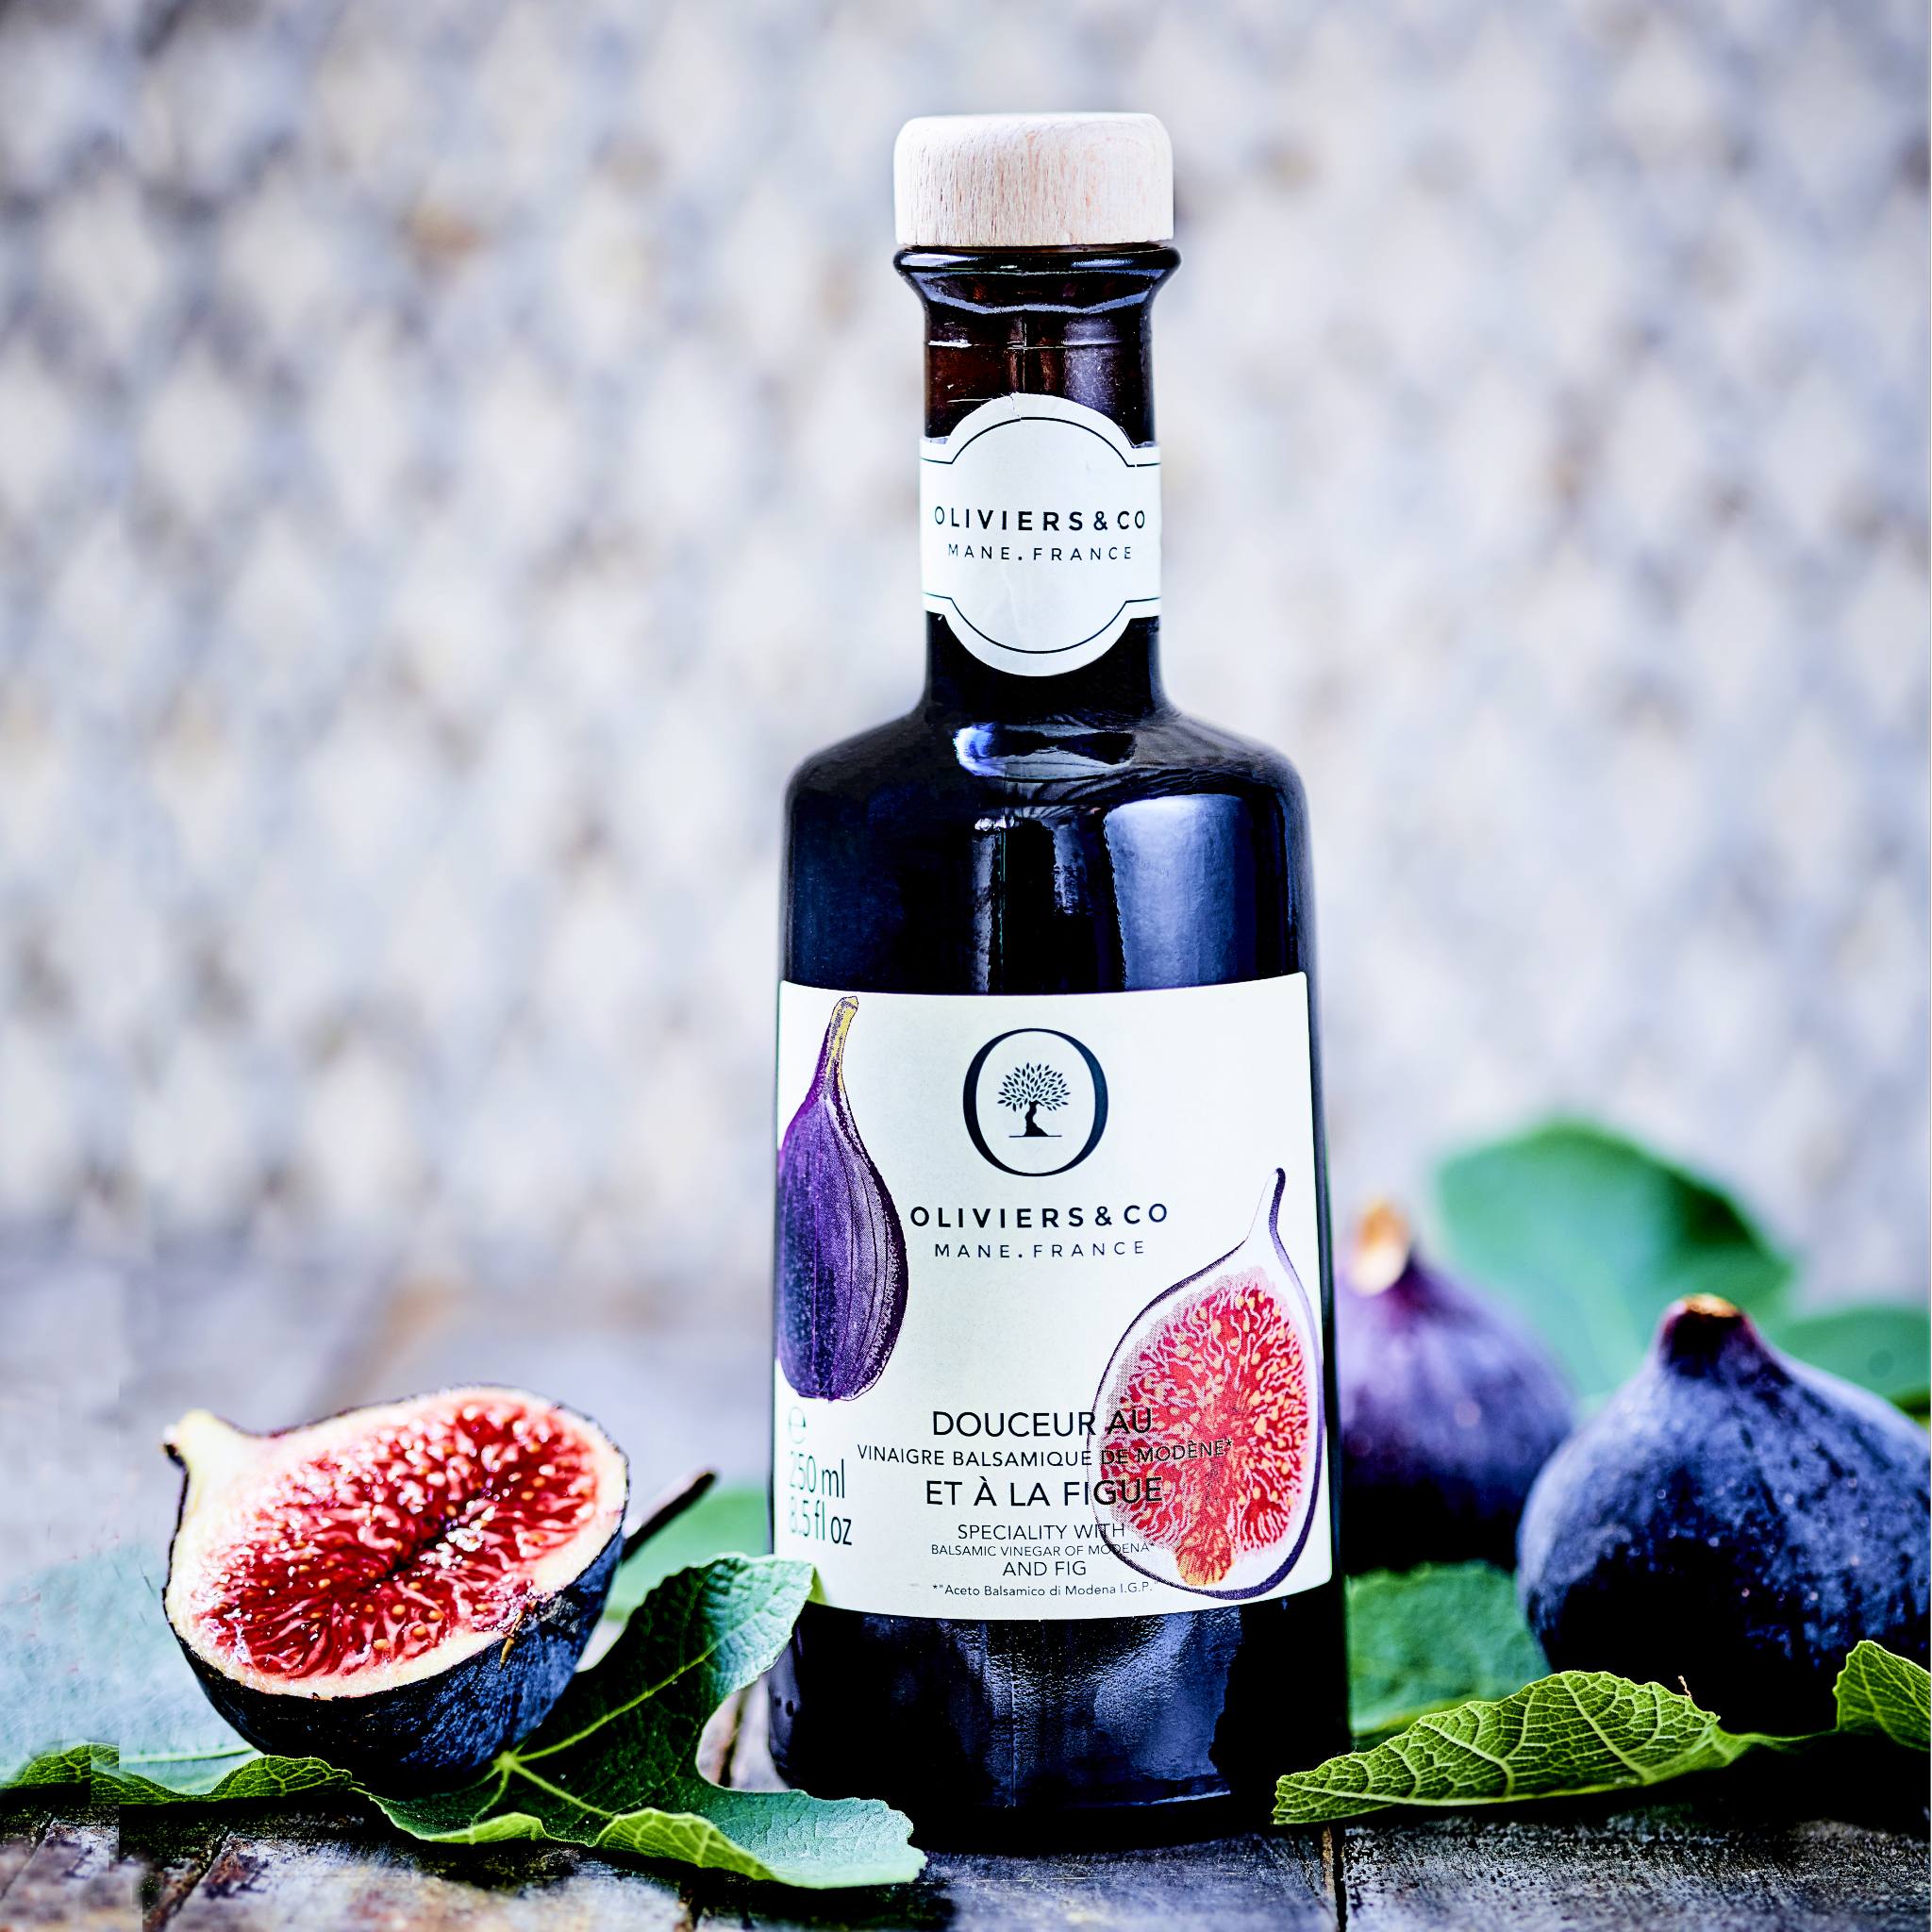 Figenbalsamico fra Oliviers & Co